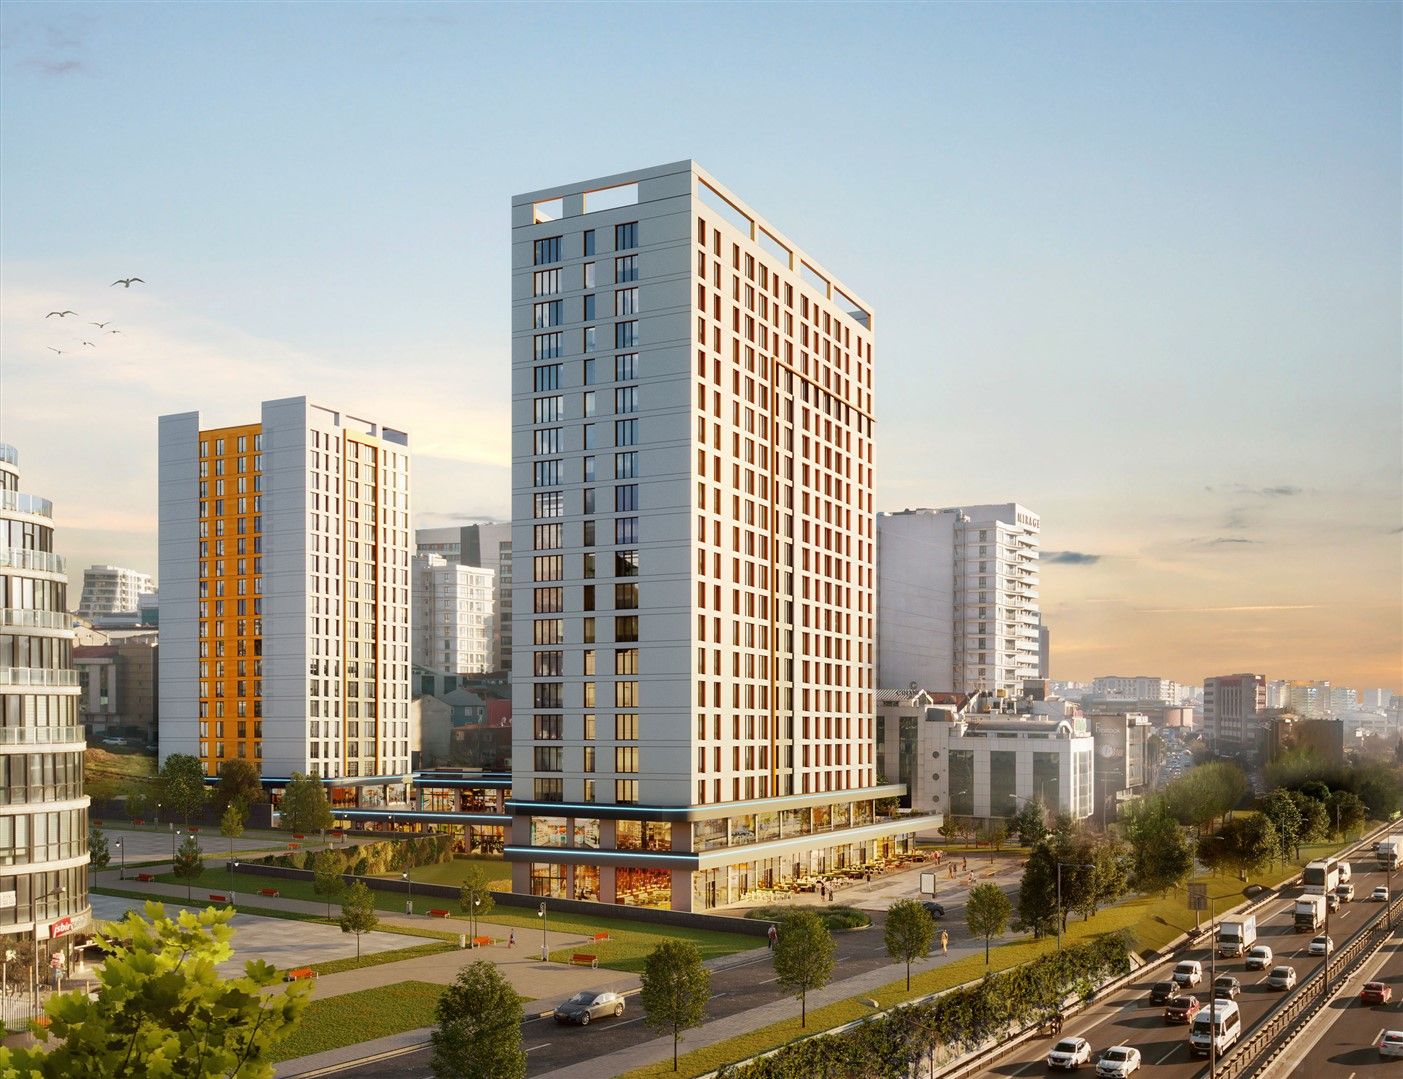 New complex with excellent location - Basin Express, Istanbul